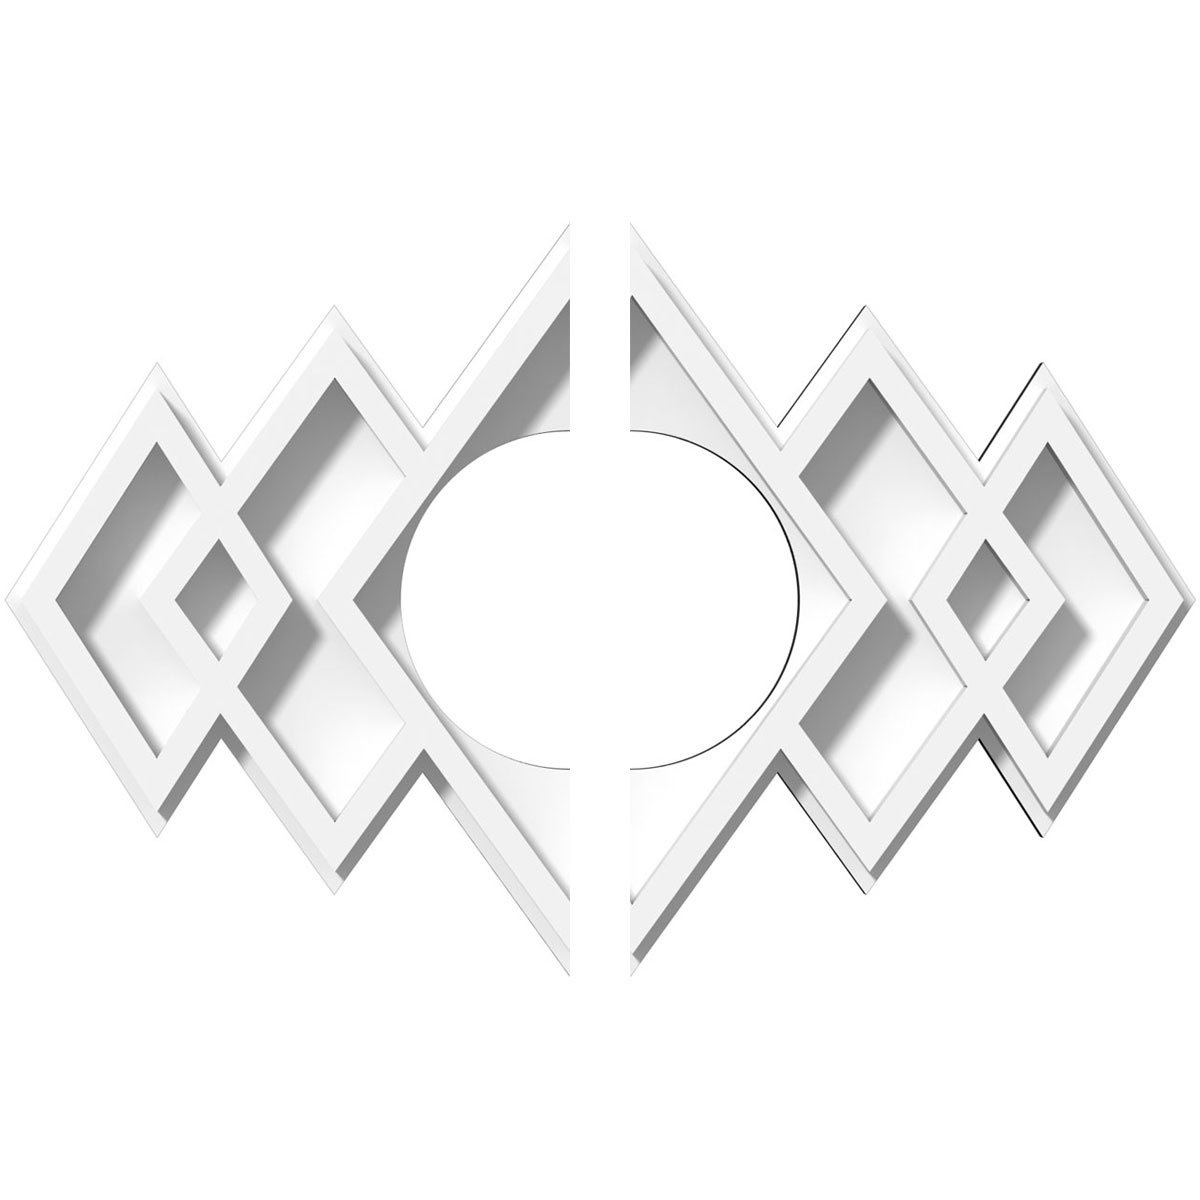 Cmp10x6ze2-03000 3 In. Id X 3 In. Rectangle Zoe Architectural Grade Pvc Contemporary Ceiling Medallion - 2 Piece